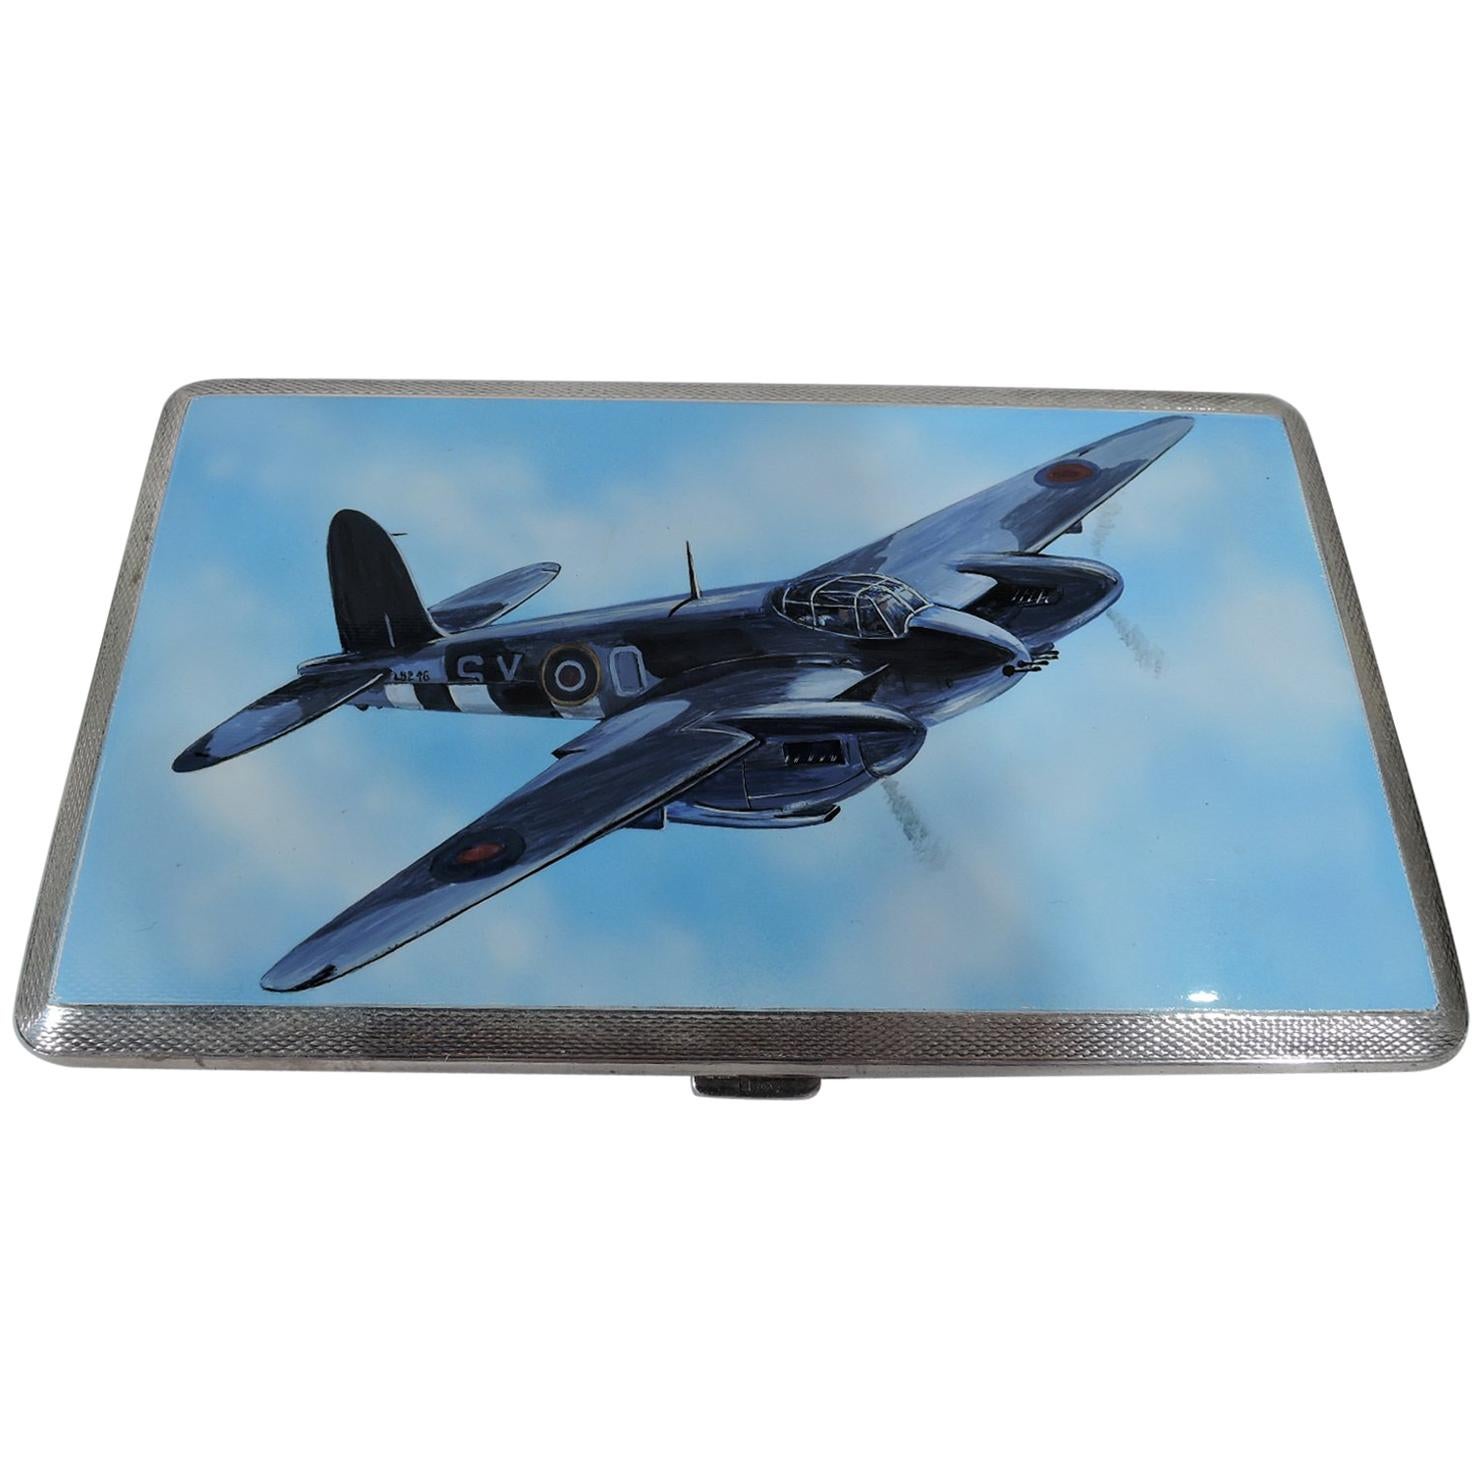 World War II-Era Sterling Silver and Enamel Case with Fighter Plane